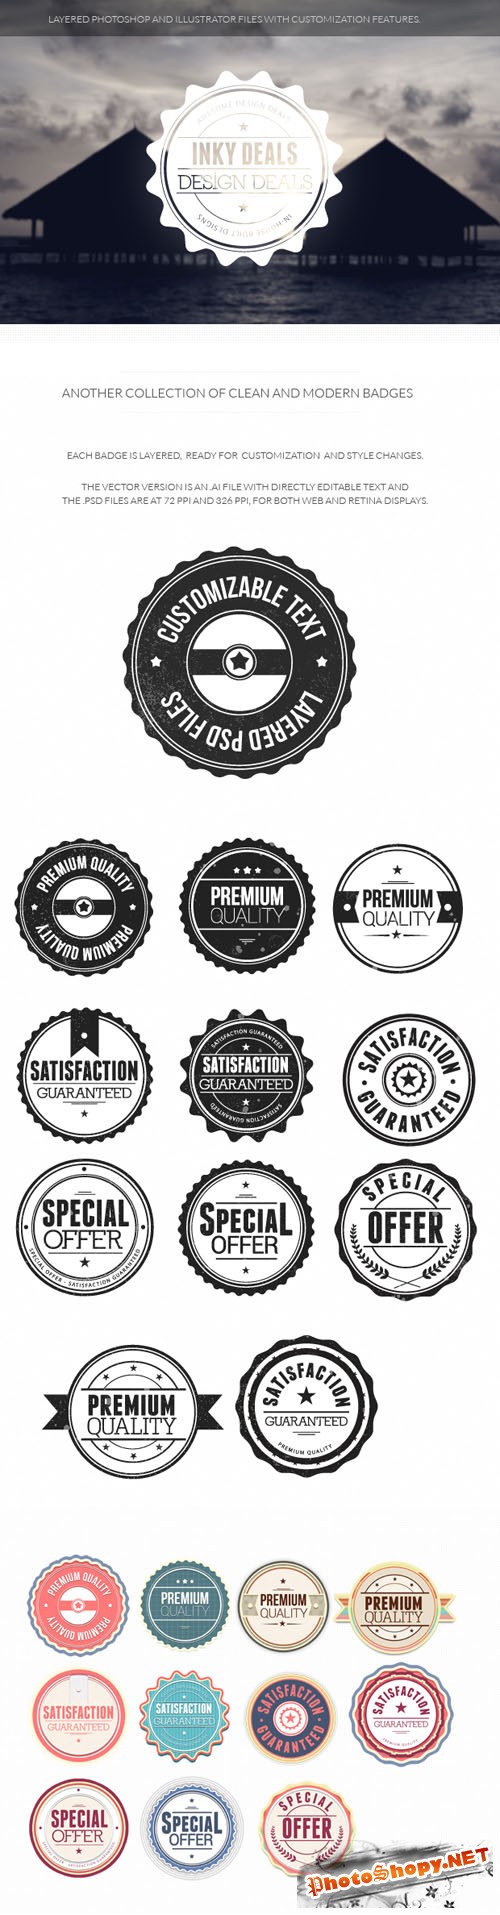 Clean and Modern Badges Vector Elements Set 2